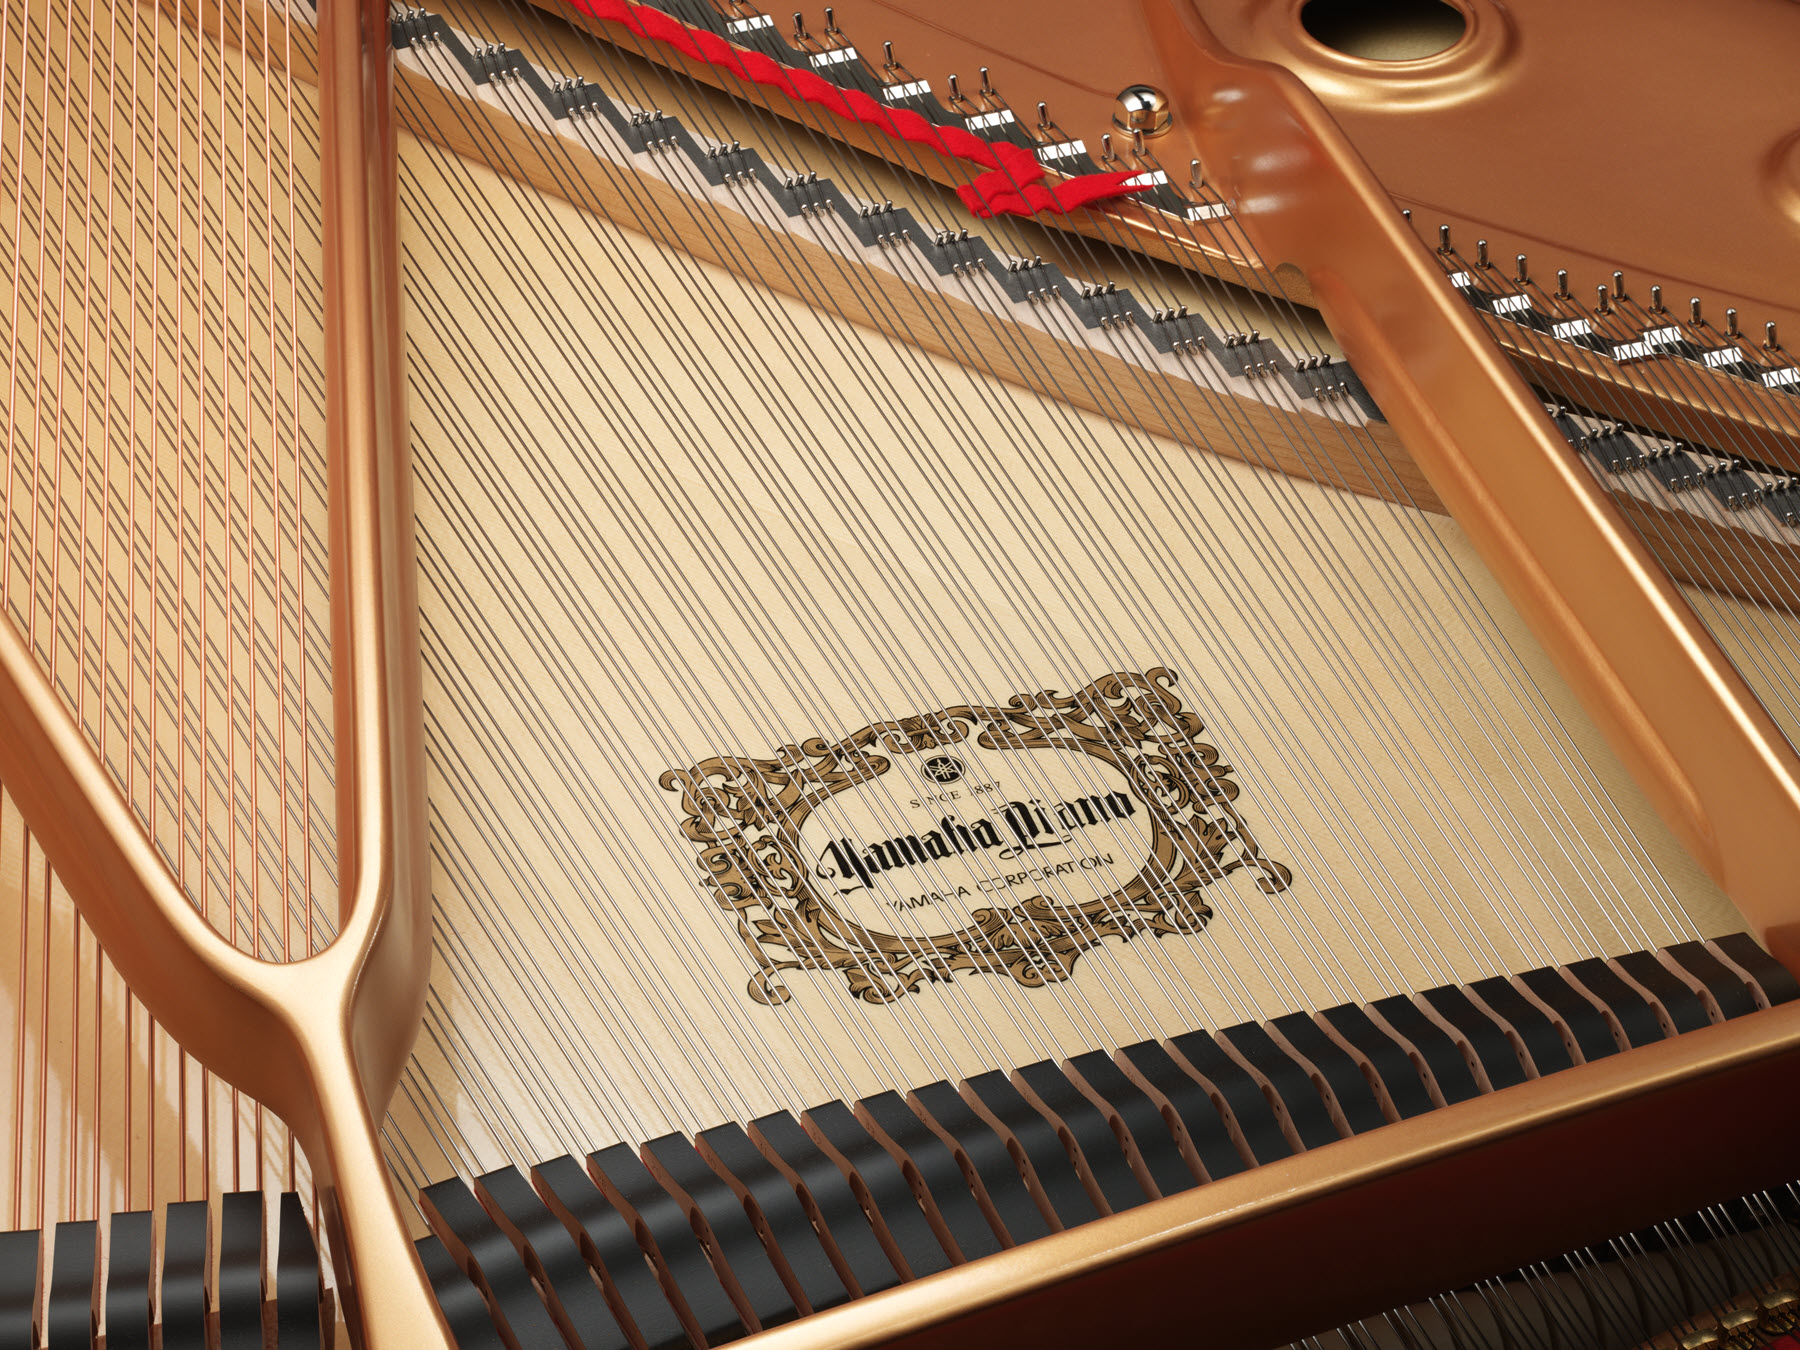 Closeup of a soundboard with the Yamaha logo visible beneath the strings.